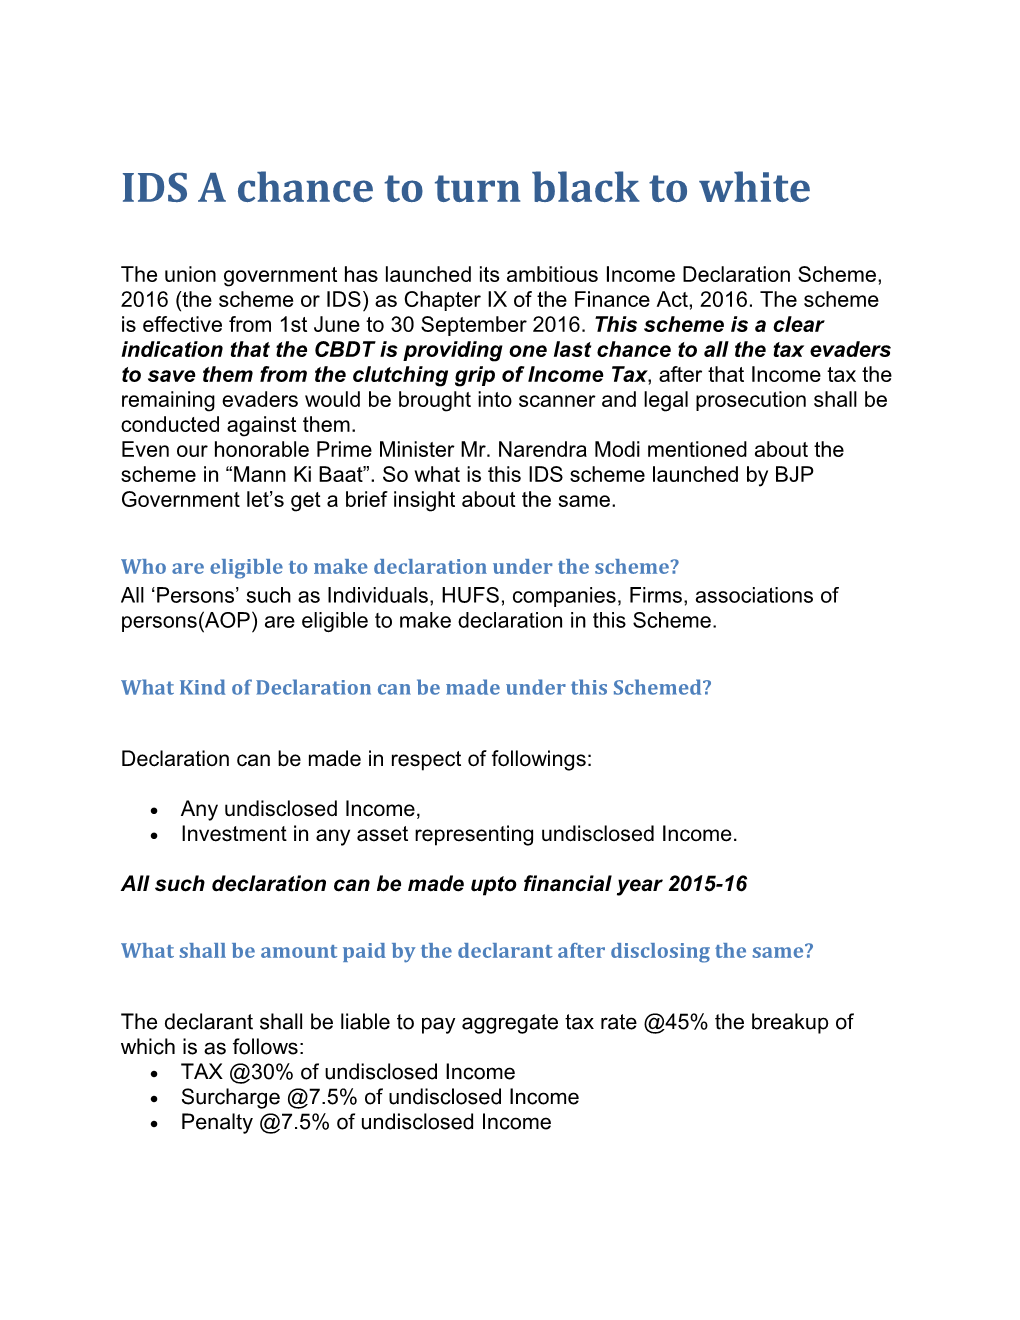 IDS a Chance to Turn Black to White